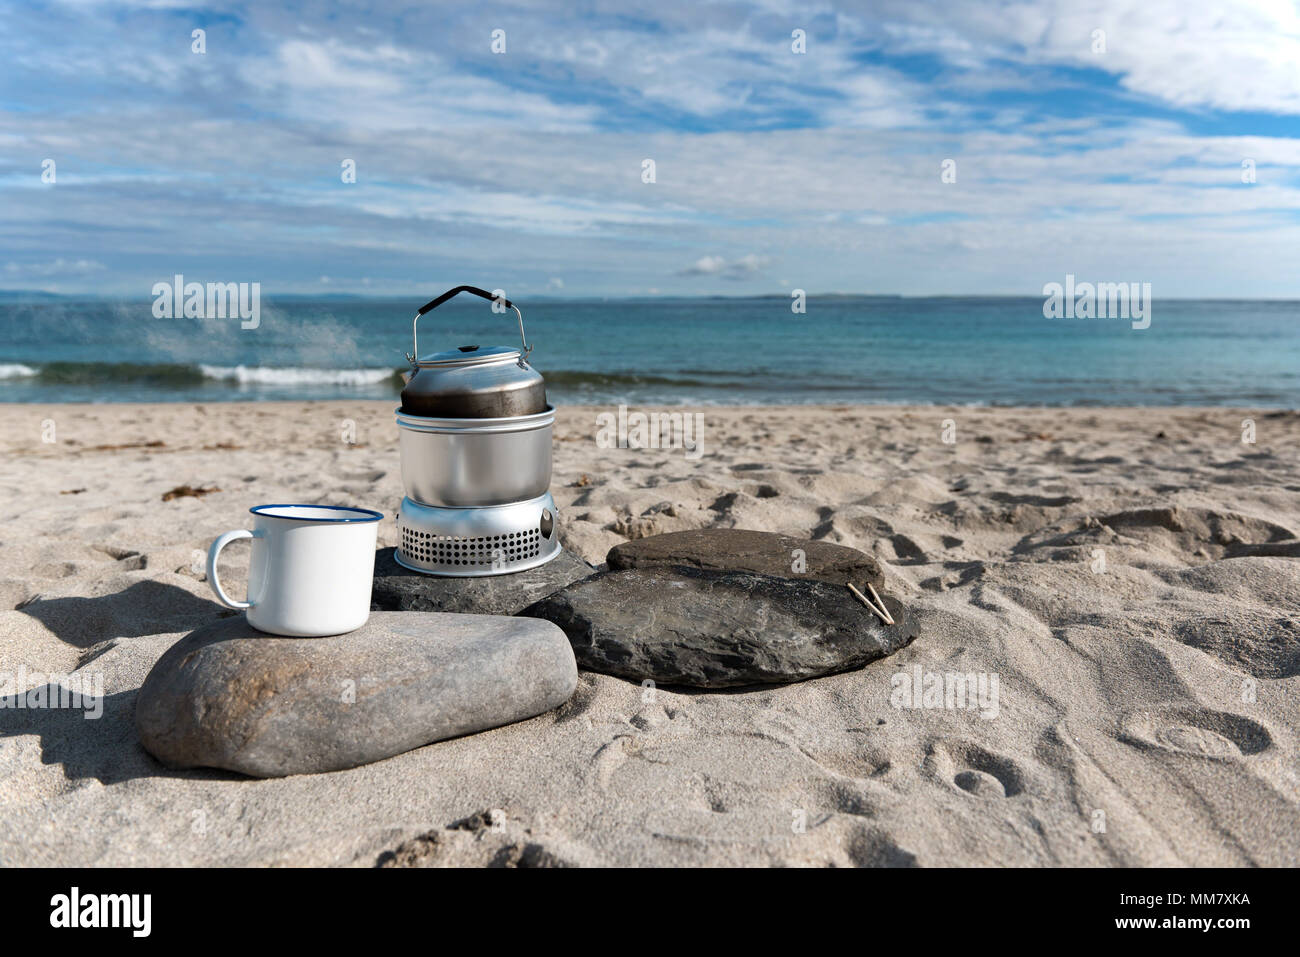 Wild camping on the beach at Sannick Bay, Caithness, Highlands, Scotland Stock Photo